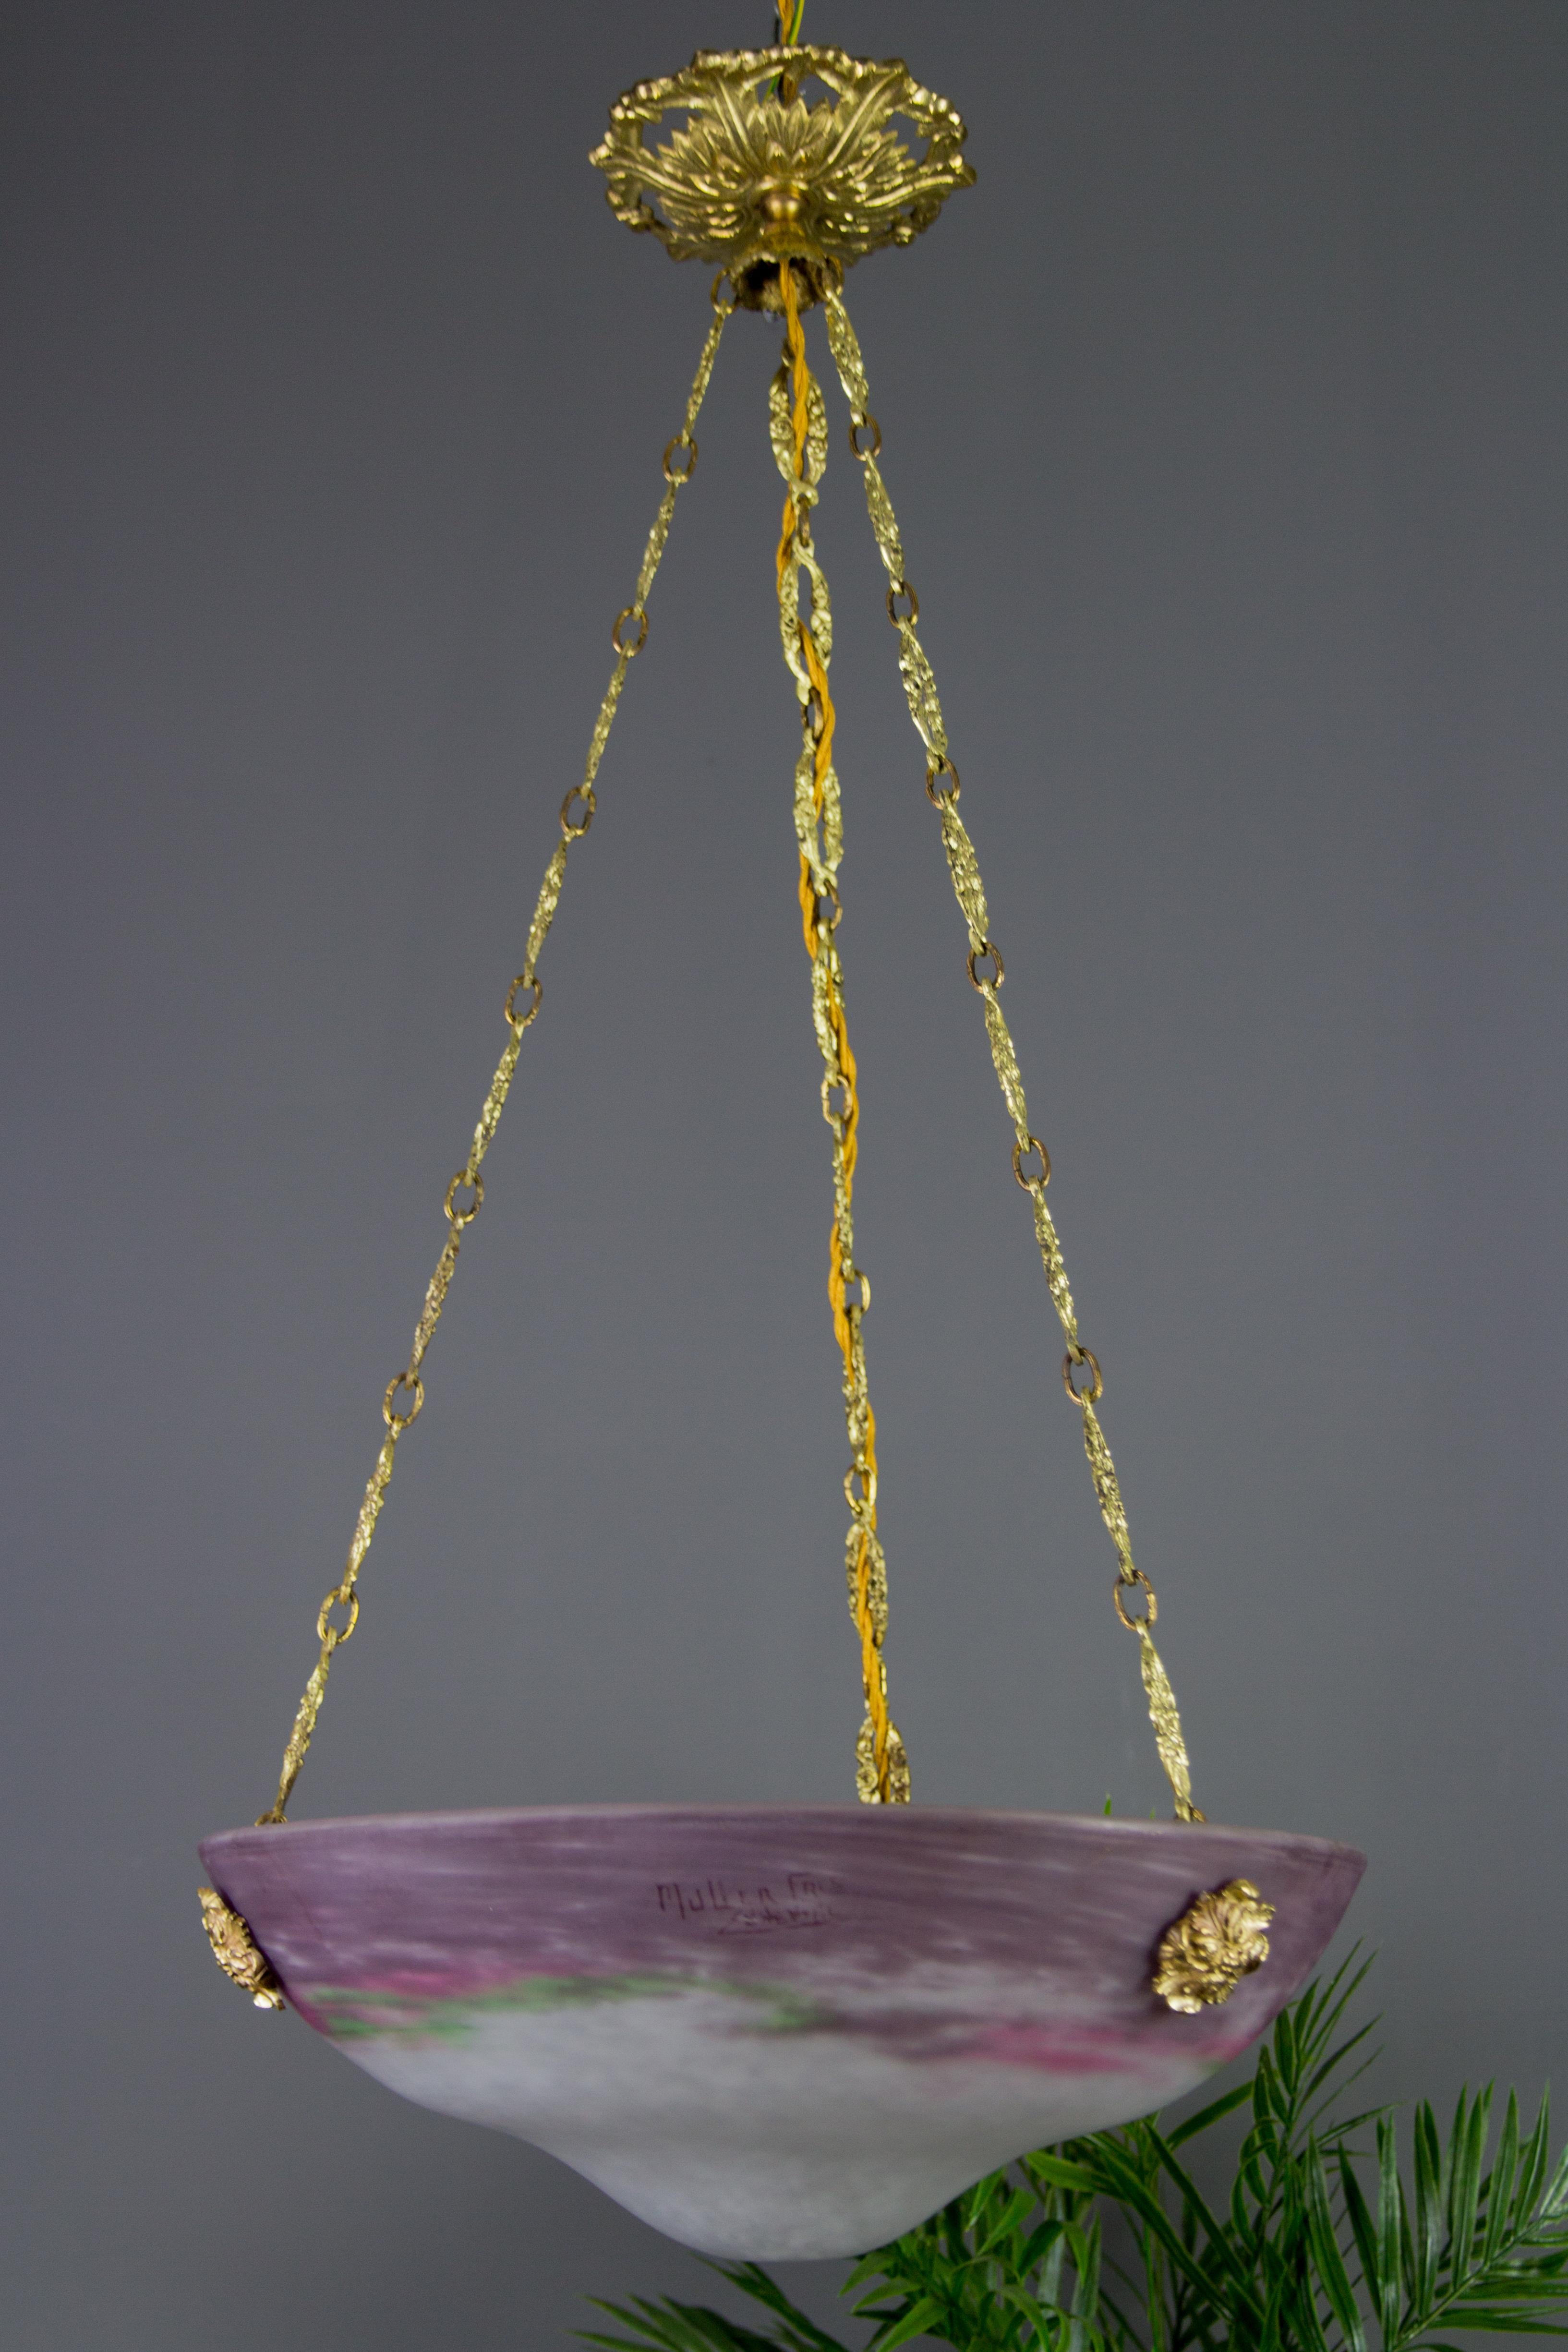 French Art Nouveau Glass Bowl Pendant Chandelier Signed by Muller Frères, 1920s For Sale 15